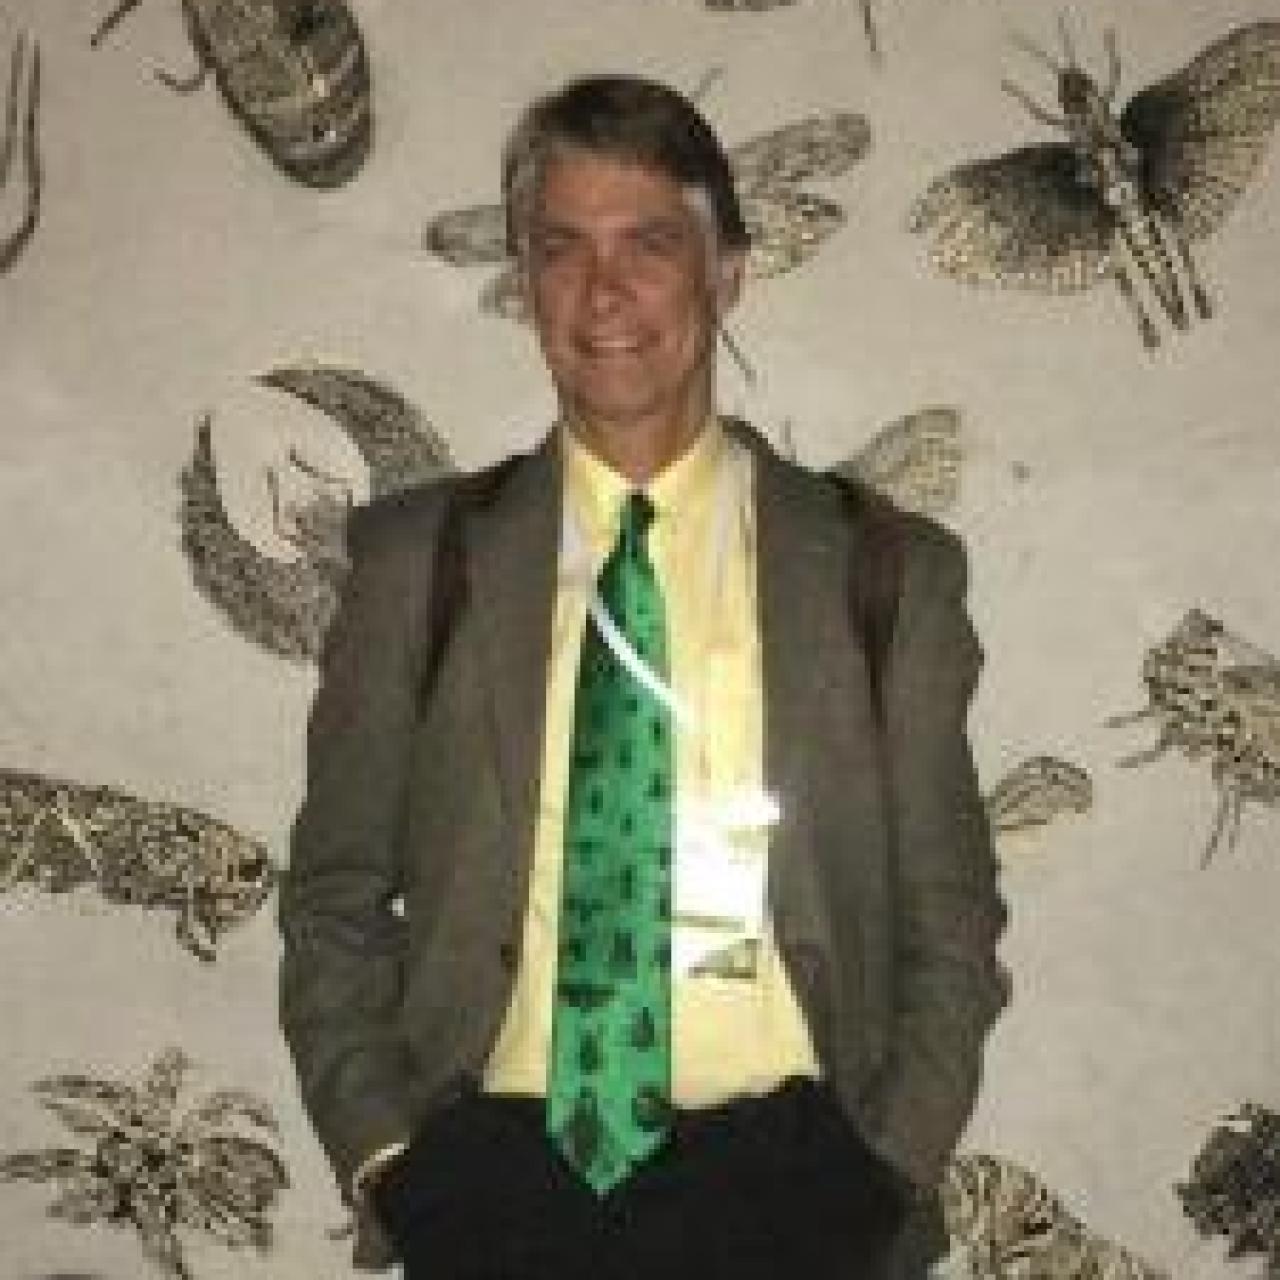 Professor Brian Casey of the Department of Entomology | The Ohio State University